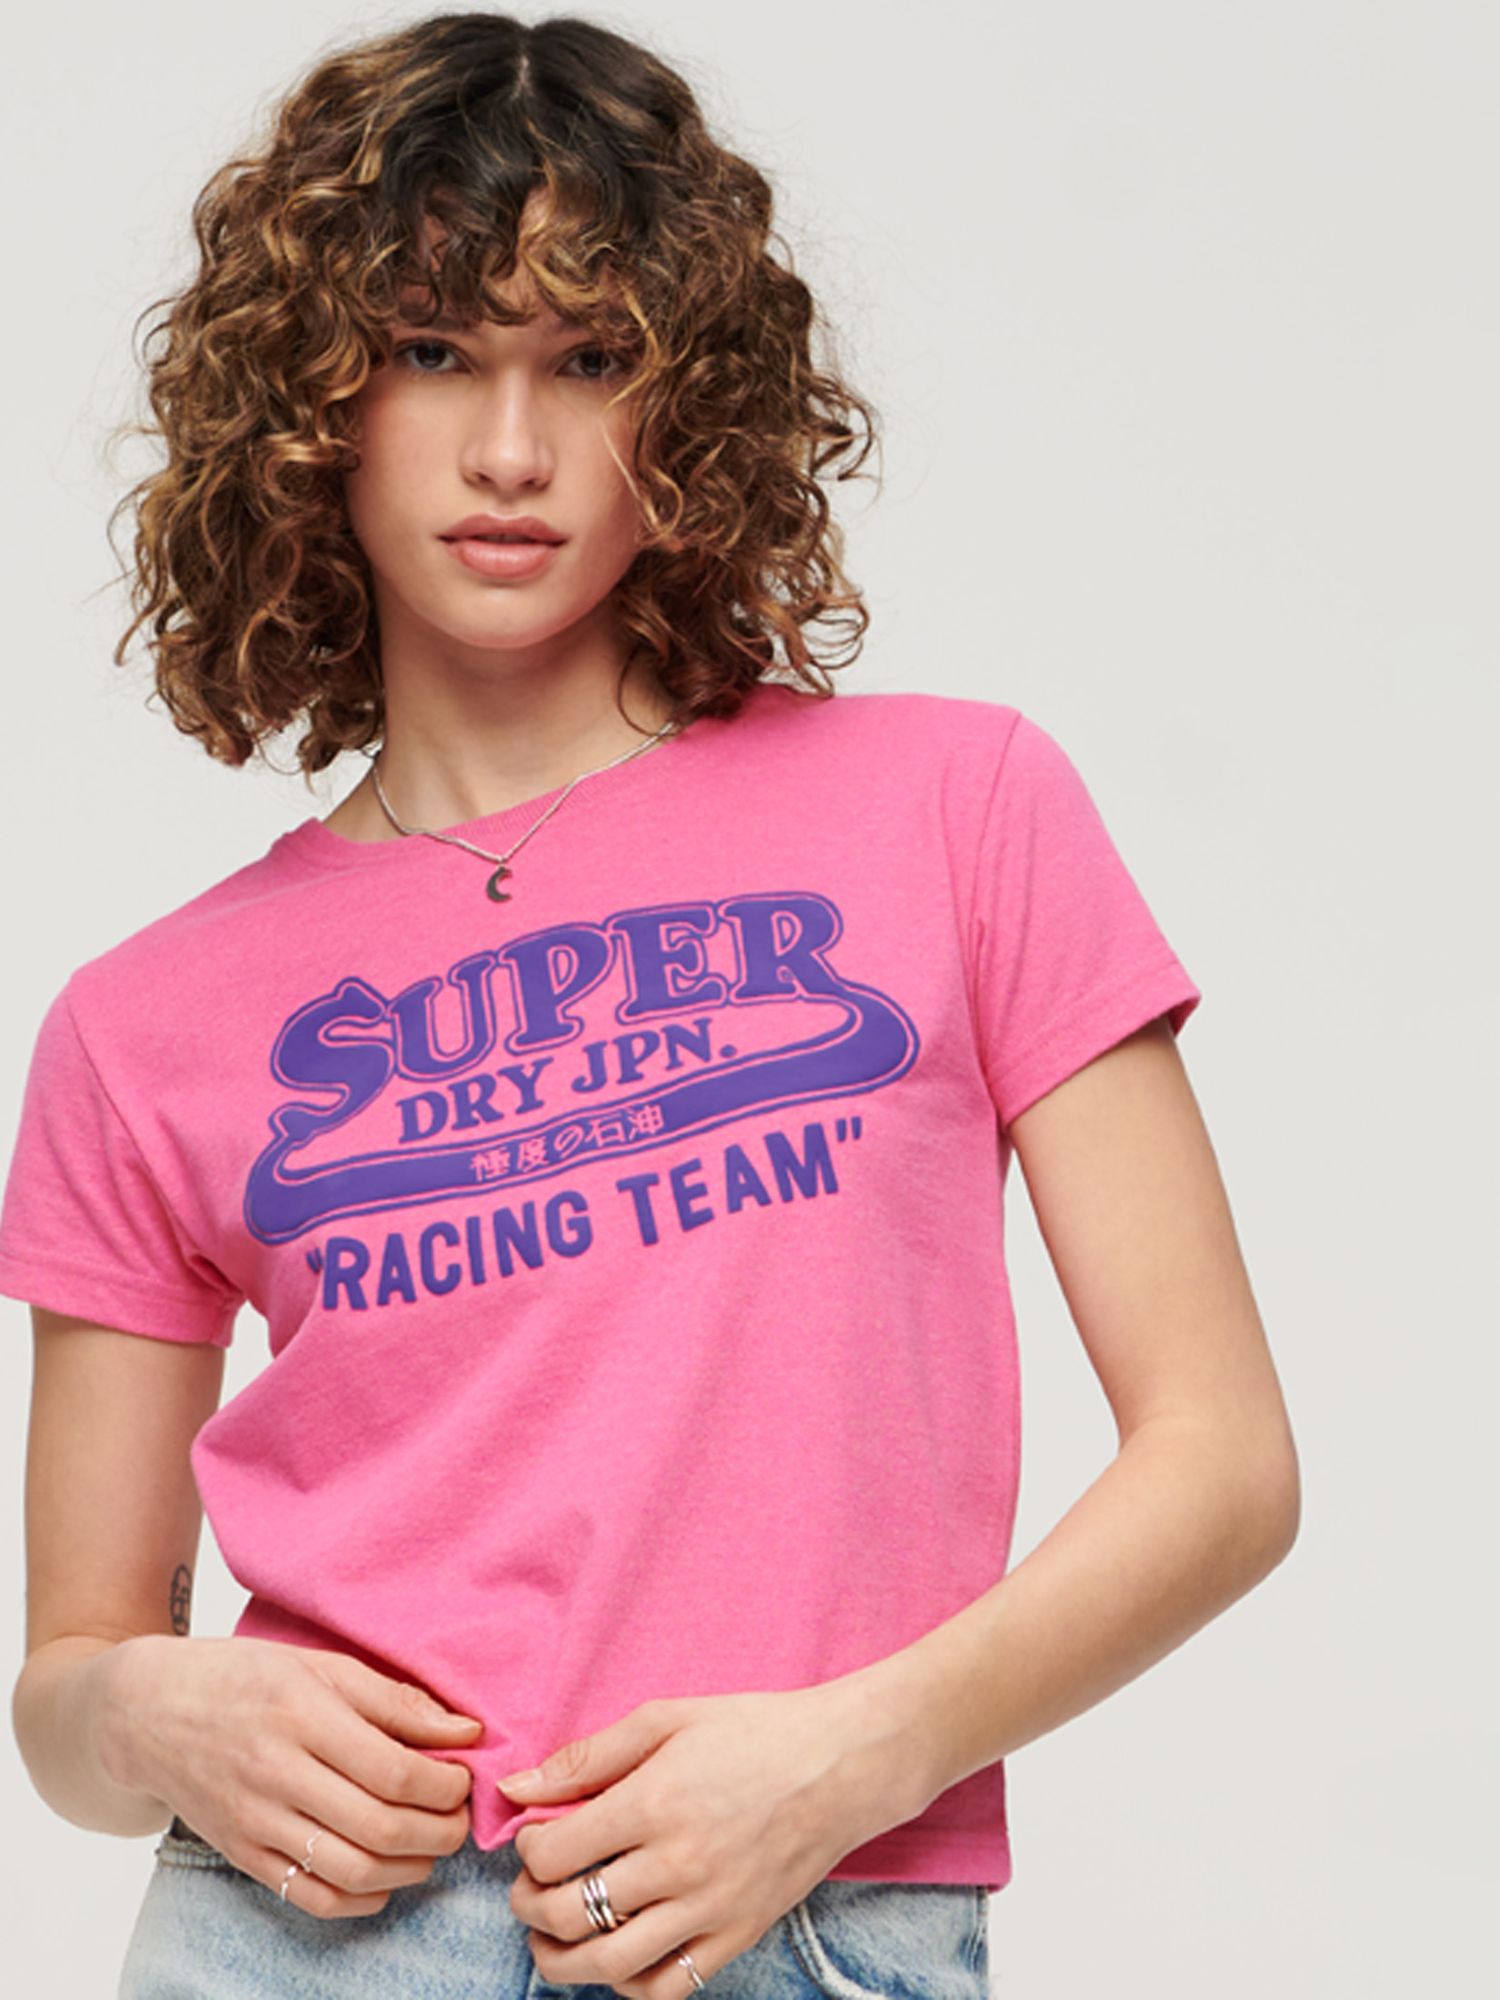 Archive Neon Graphic T-Shirt - Superdry